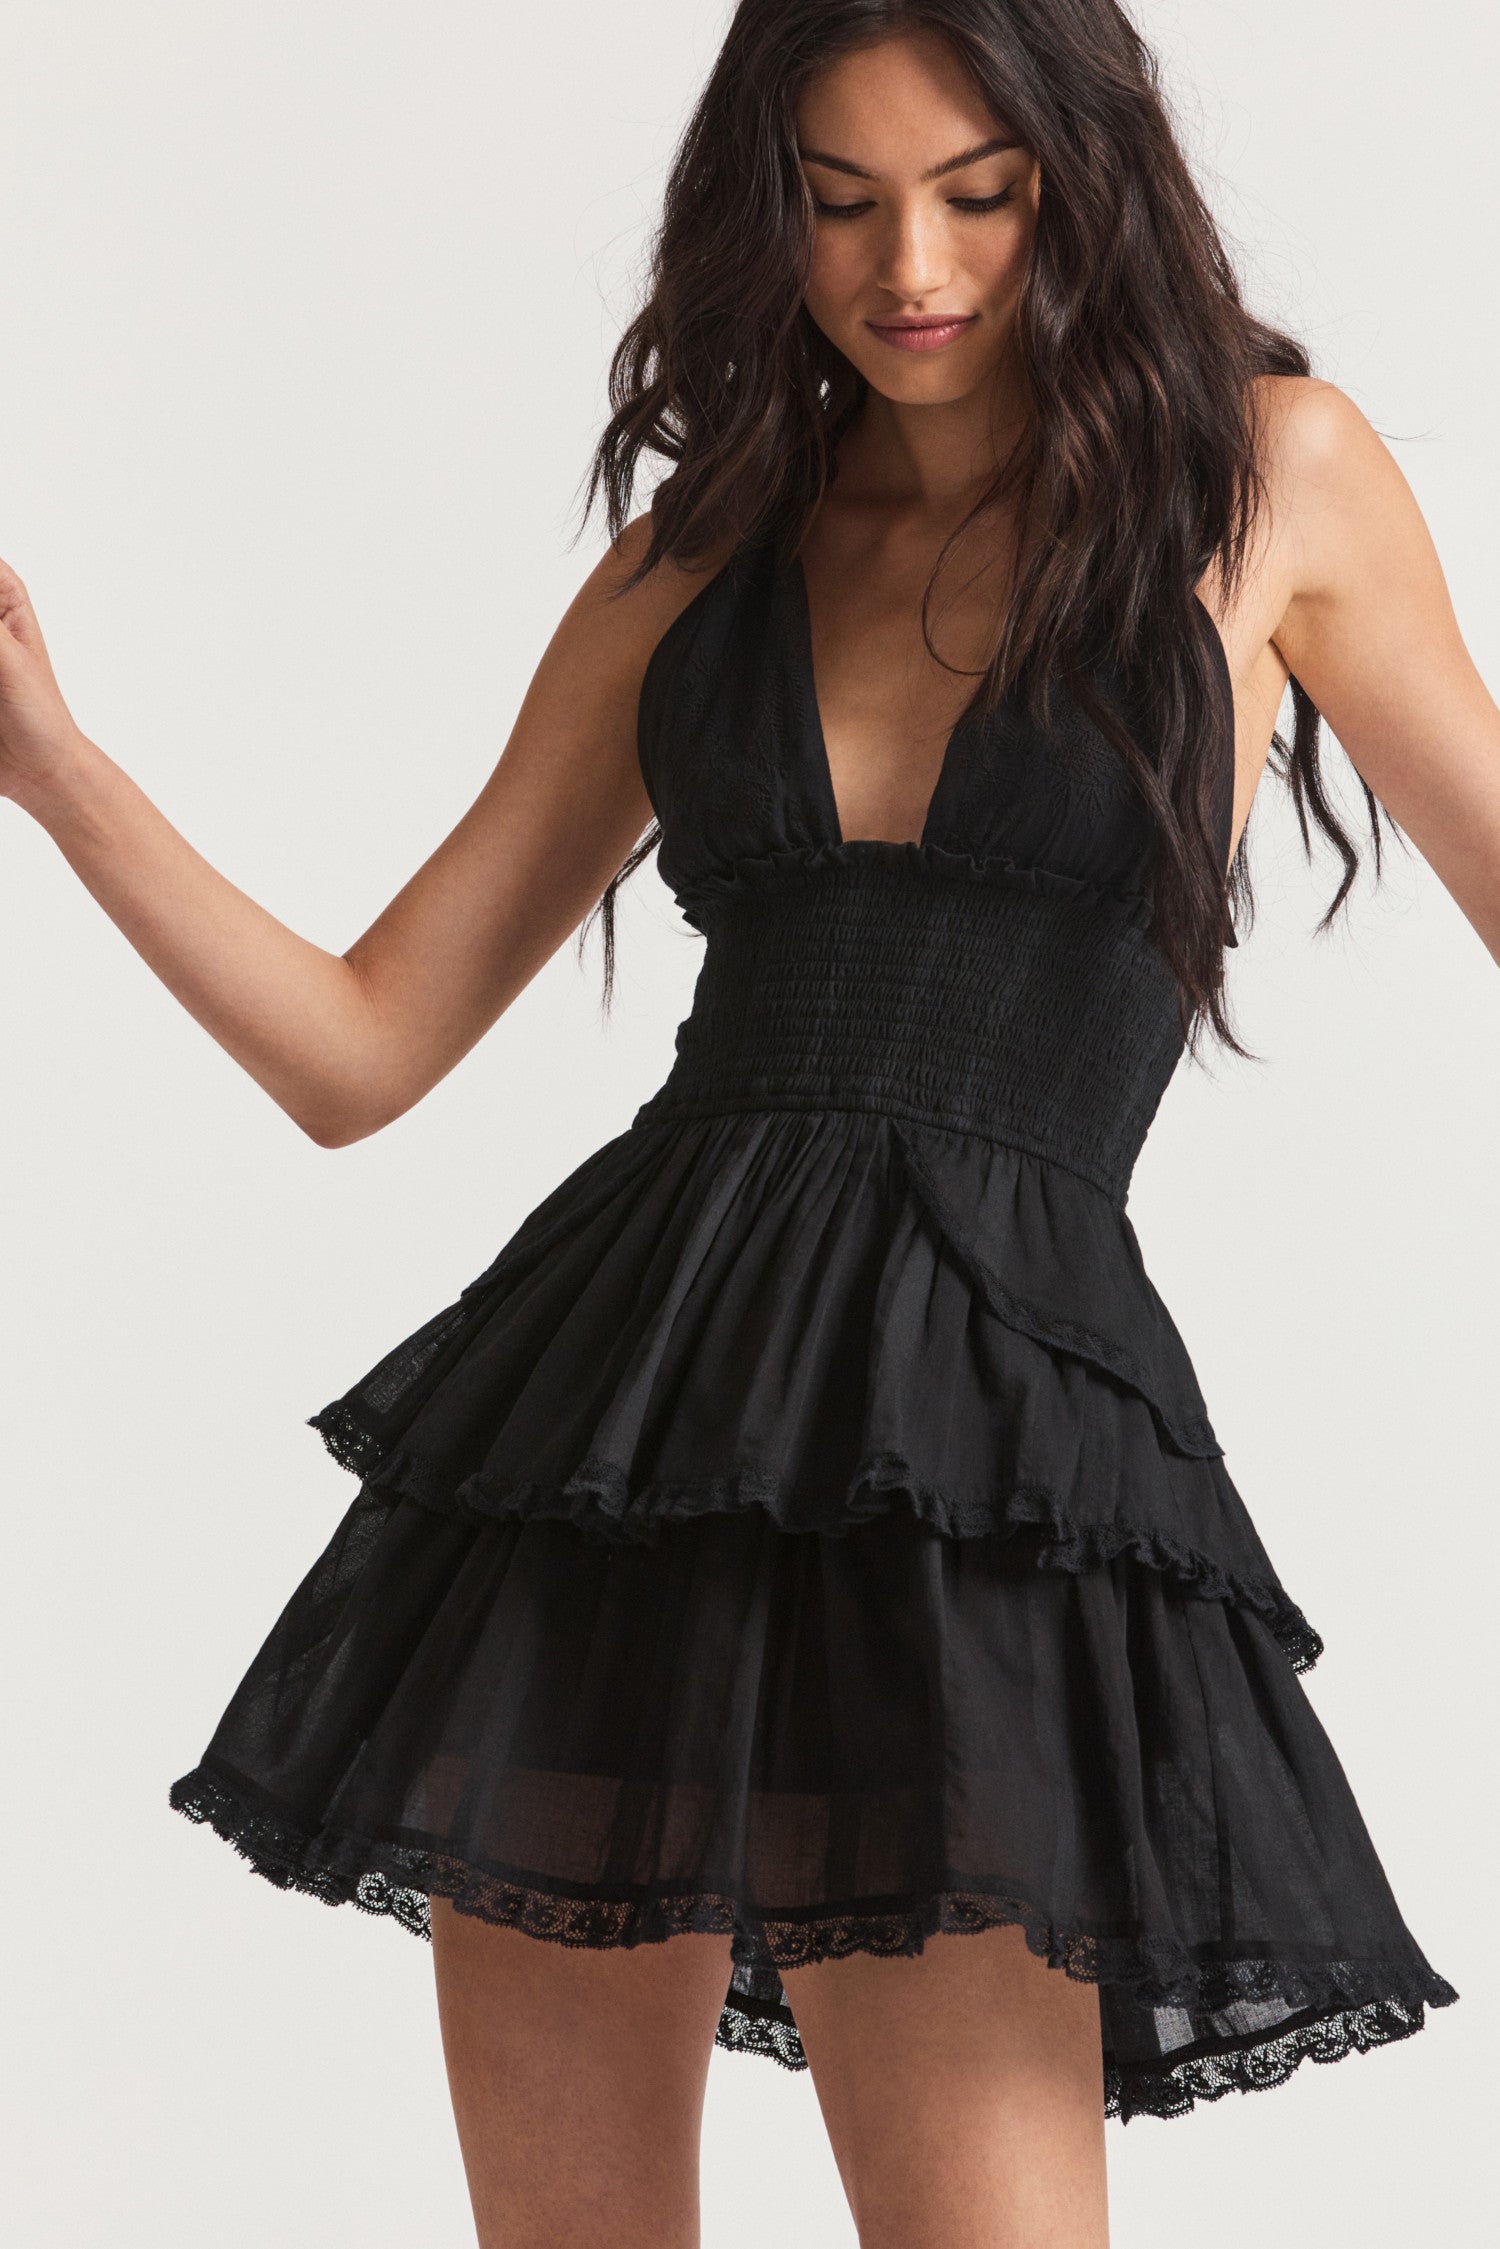 Black mini dress with custom dobby striped cotton with all-over botanical embroidery. This low-cut convertible halter, with piping at the neckline, ties in a generous bow at the neck and can be crossed at front. Below a wide smocked waistband, the skirt flares to smaller details at the hips and two scalloped tiers with schiffli cutwork.